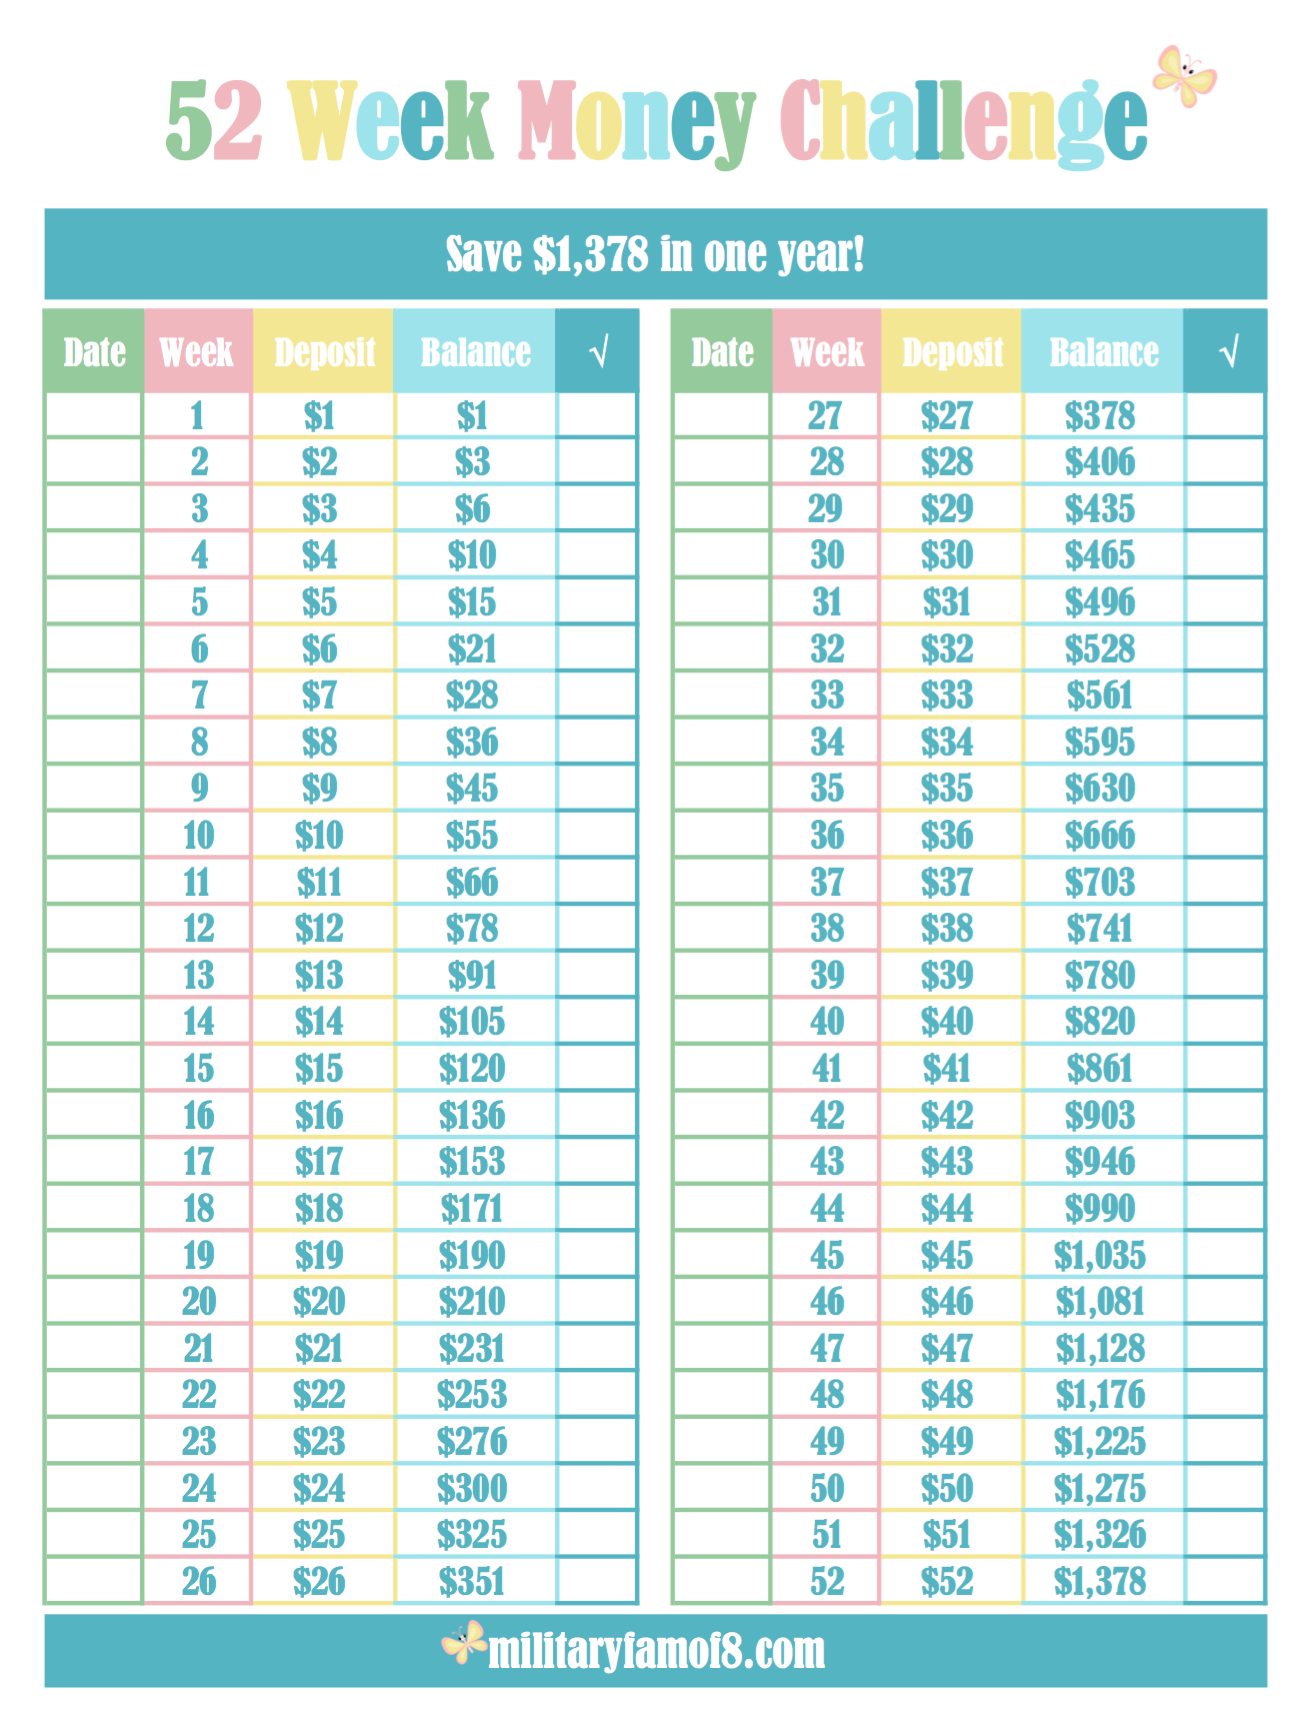 Different Versions of the 52 Week Money Challenge Printable